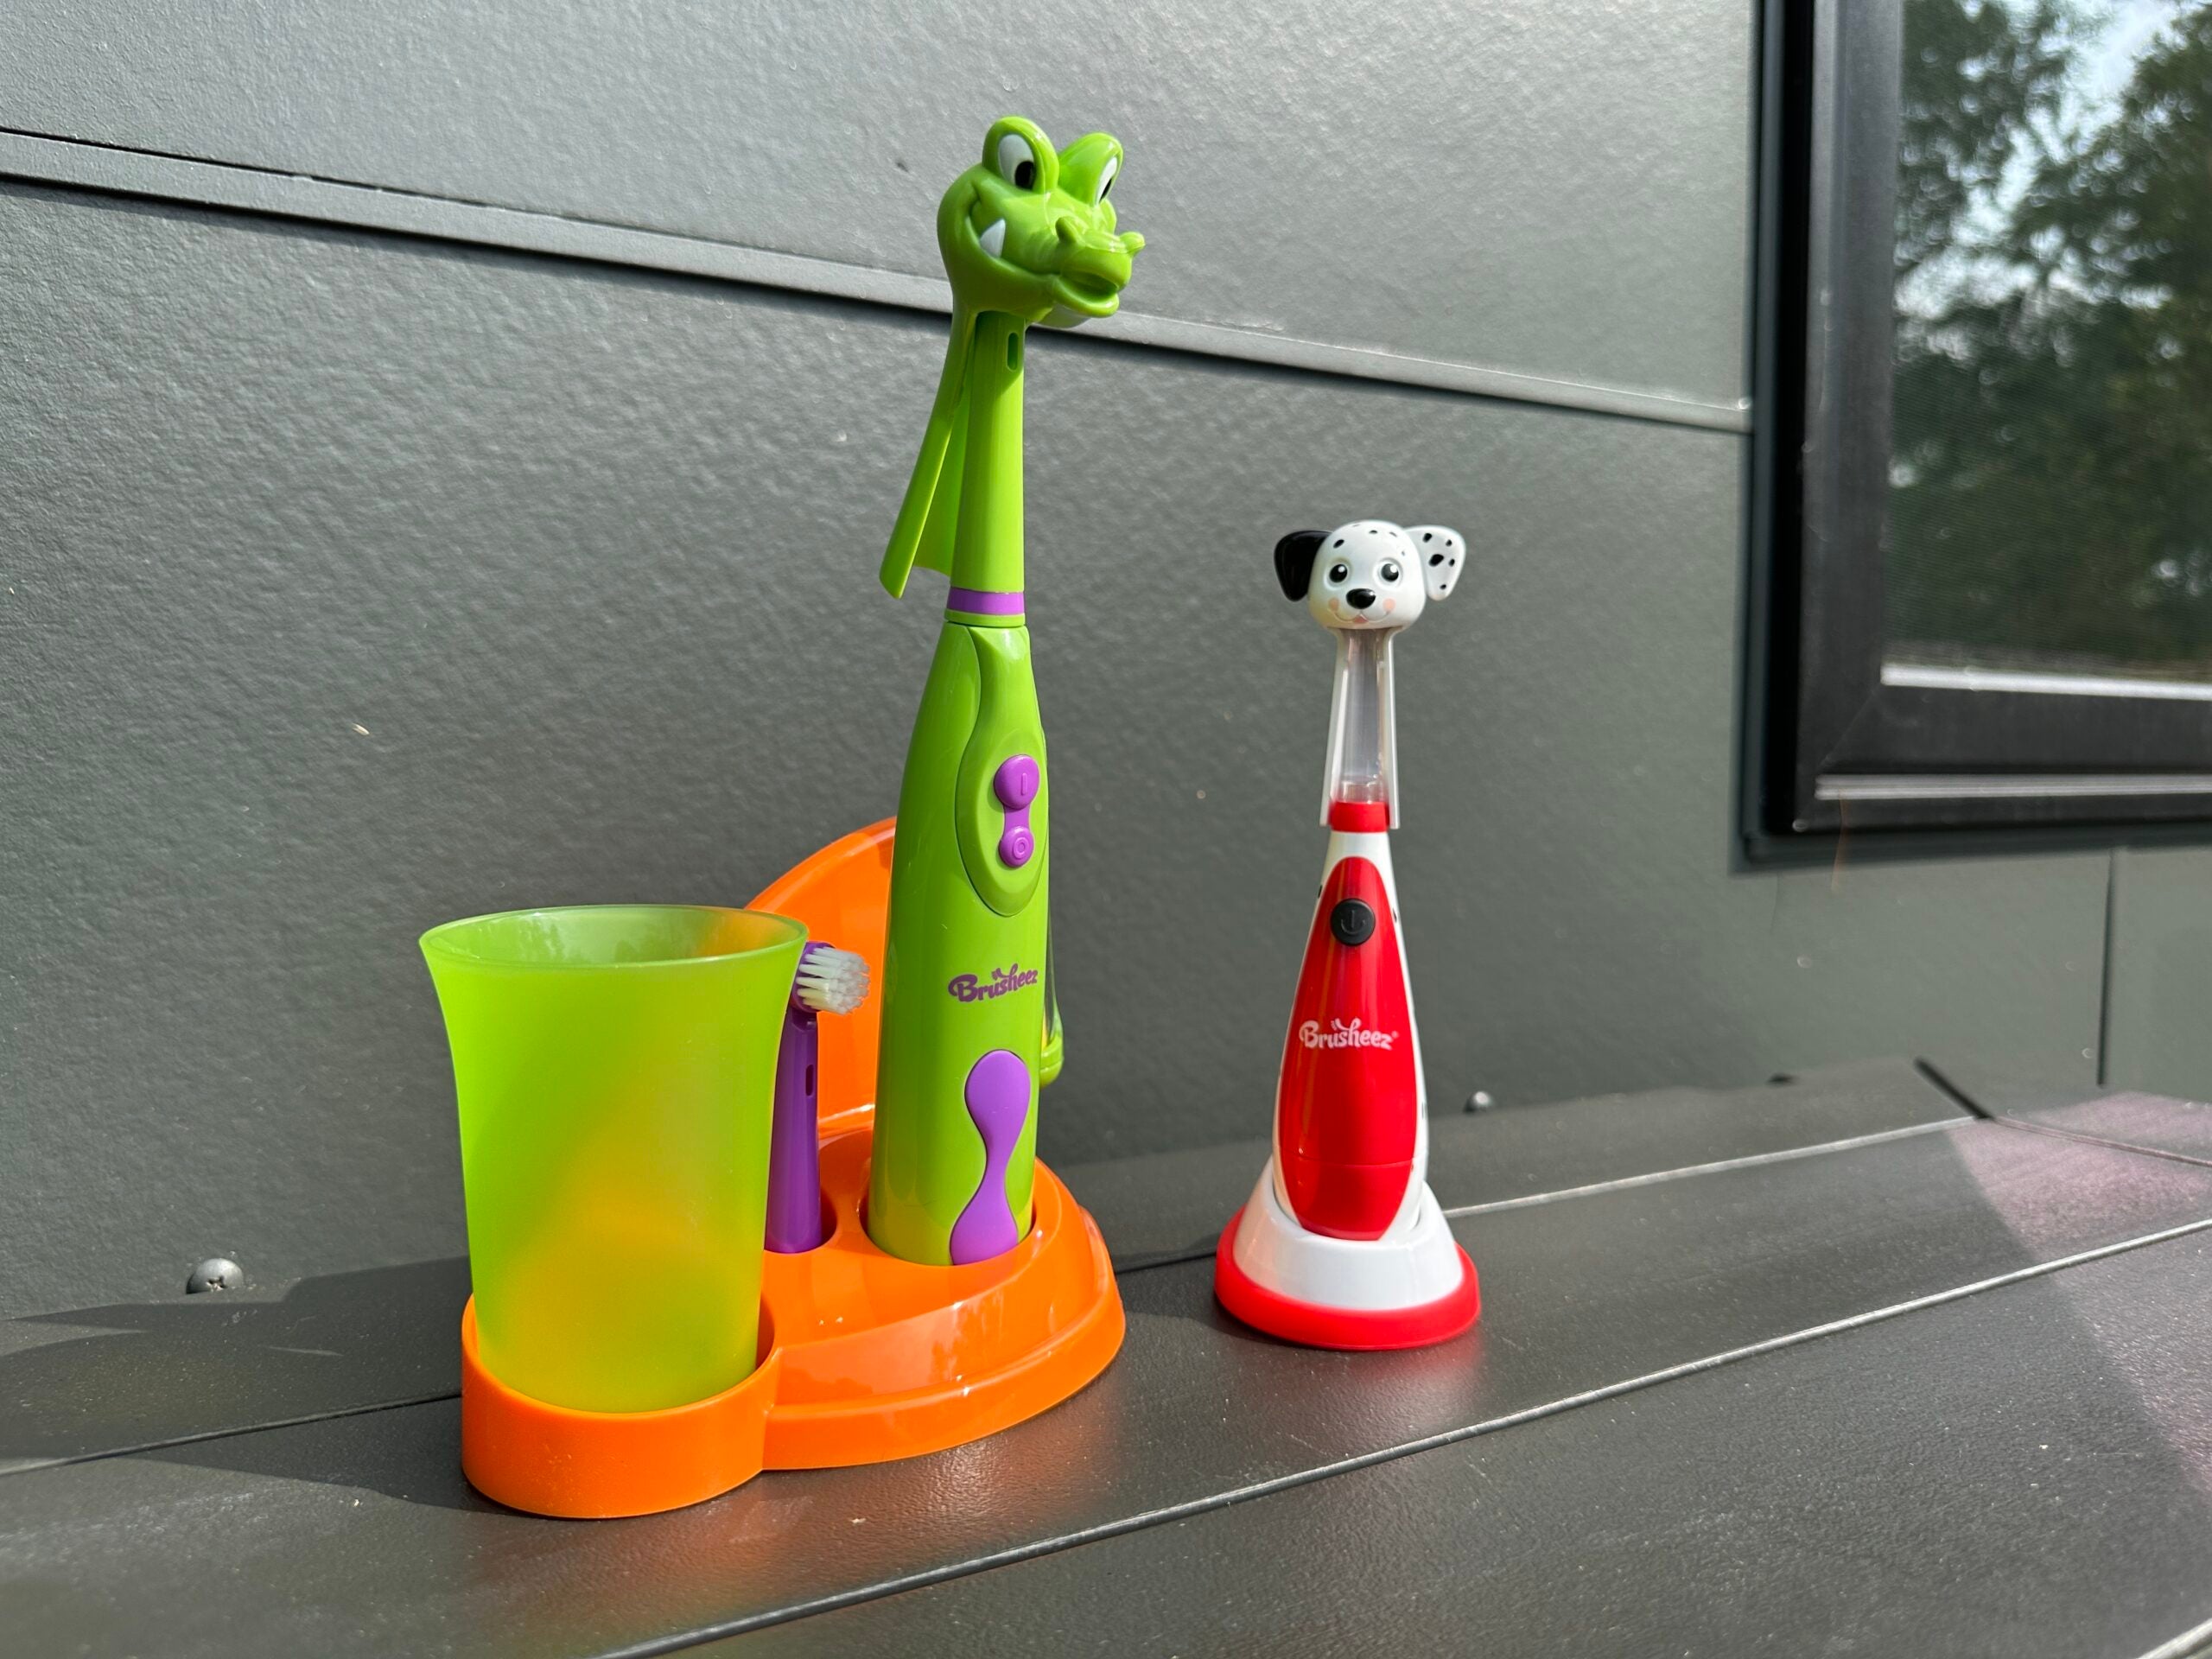 Brusheez makes the best electric toothbrushes for kids in a range of animal shapes.